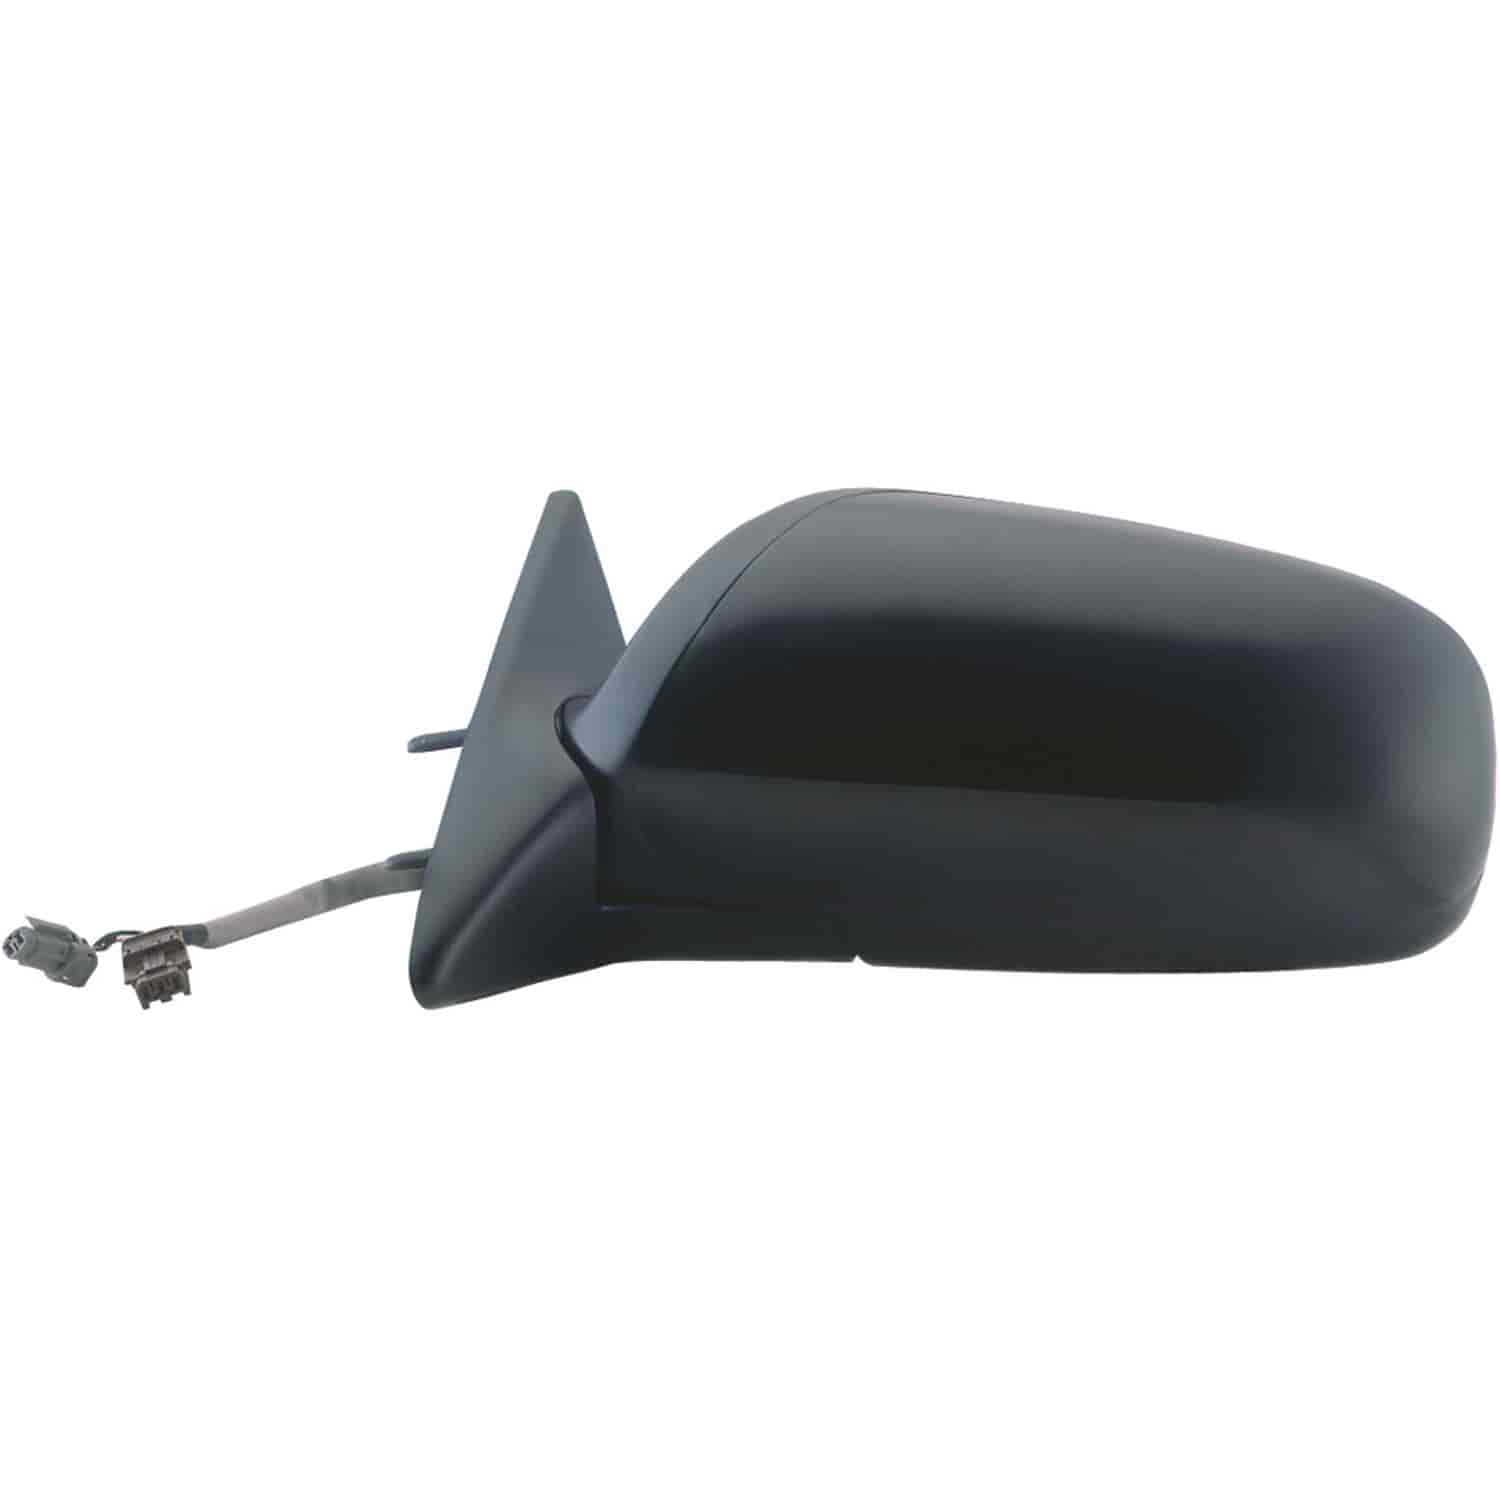 OEM Style Replacement mirror for 96-99 Nissan Maxima Infiniti I30 driver side mirror tested to fit a